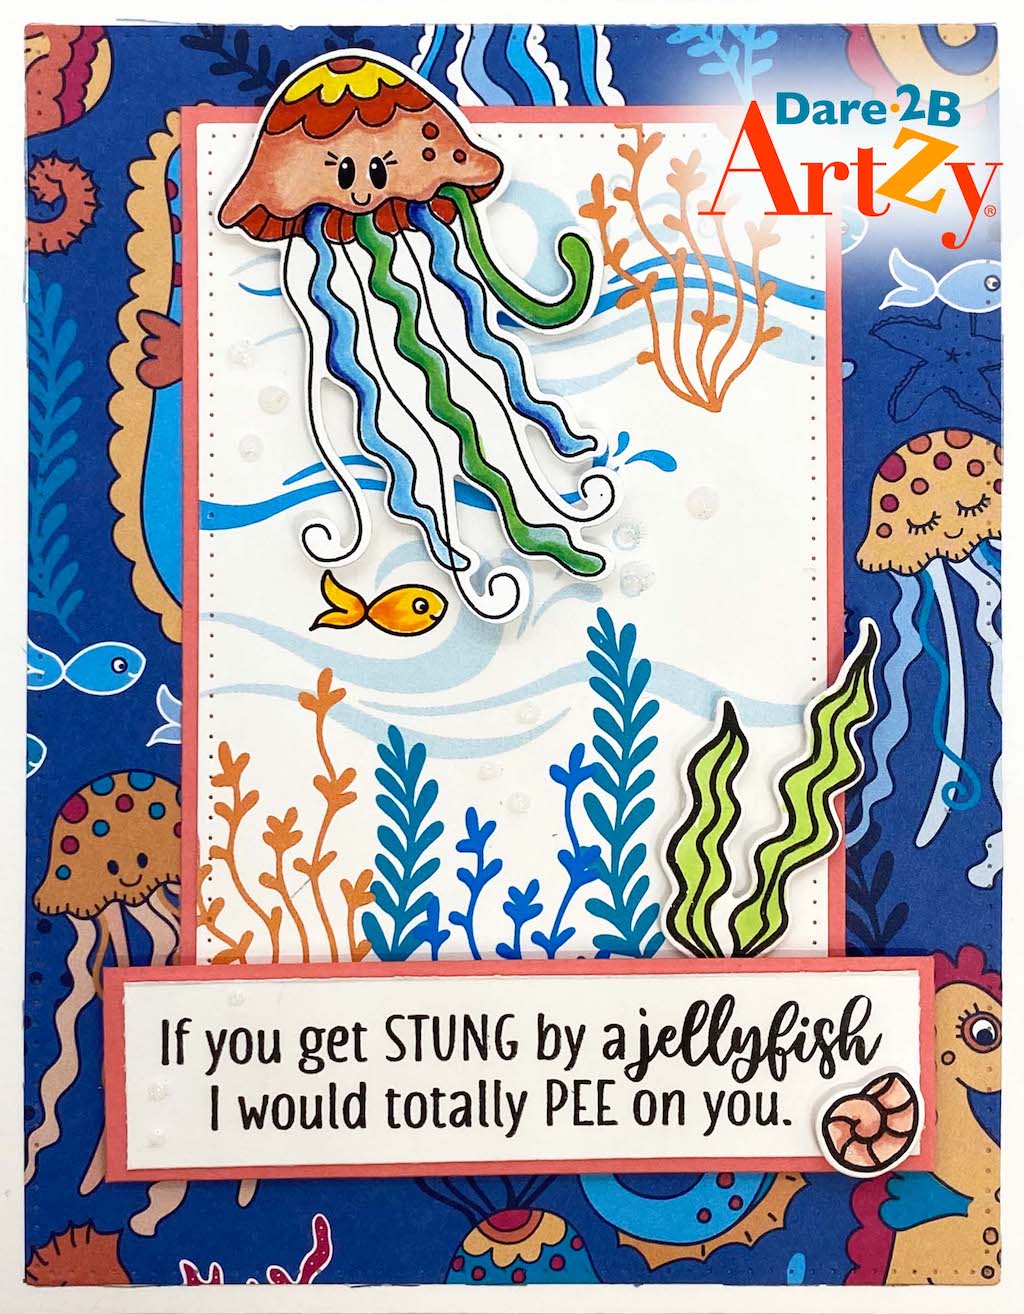 Handmade Card using the stamp set and die "Jellyfish" from Dare 2B Artzy. Card features a jellyfish with the sentiment "If you get stung by a jellyfish I wound totally pee on you".